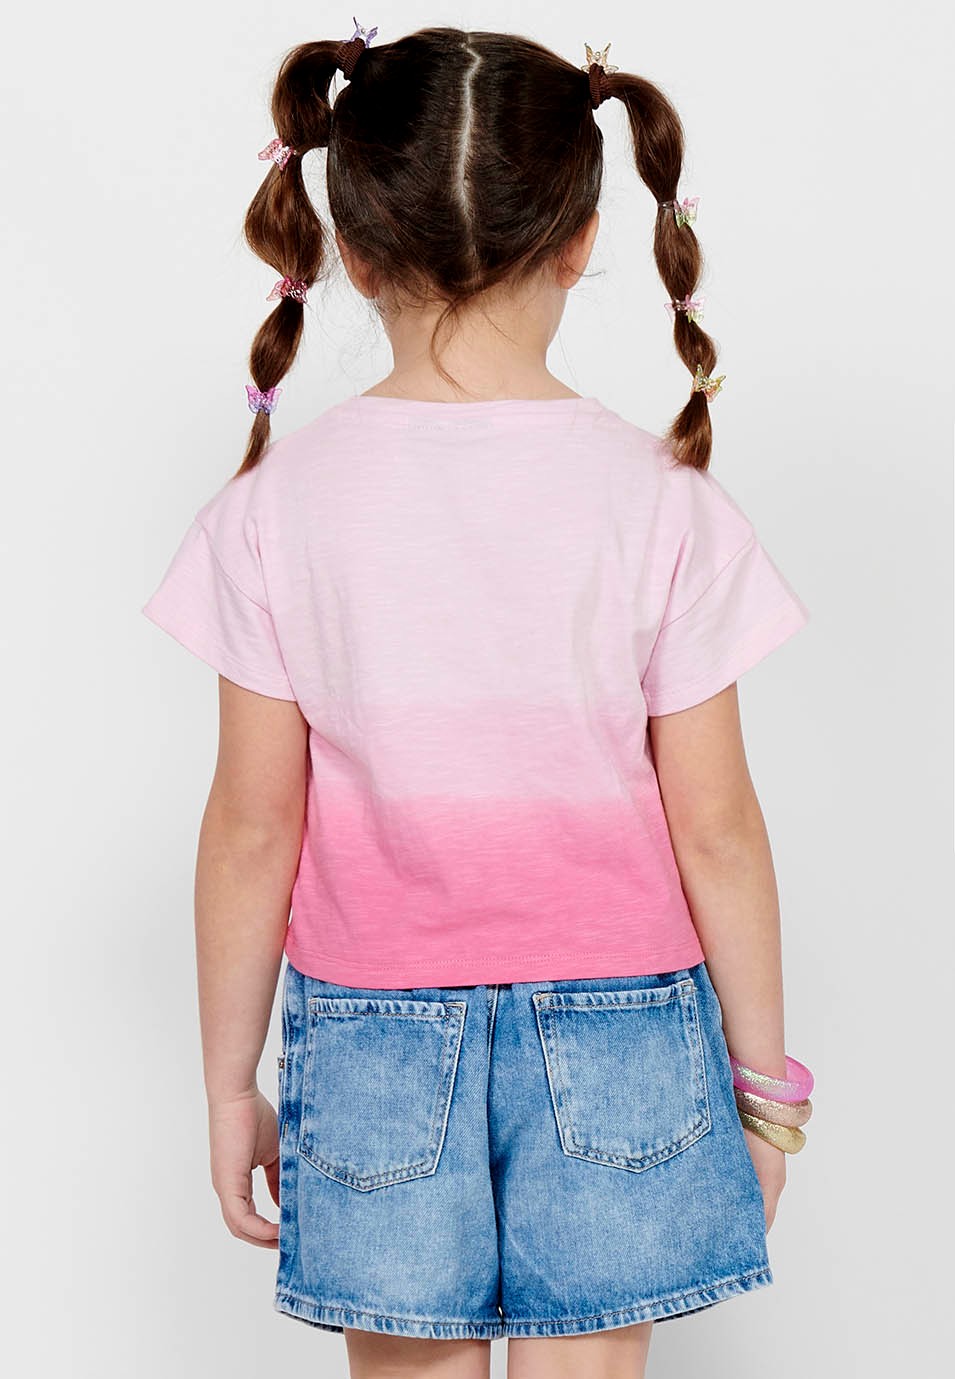 Short-sleeved T-shirt Cotton Top with Round Neck and Front Letters with Pink Volume for Girls 4